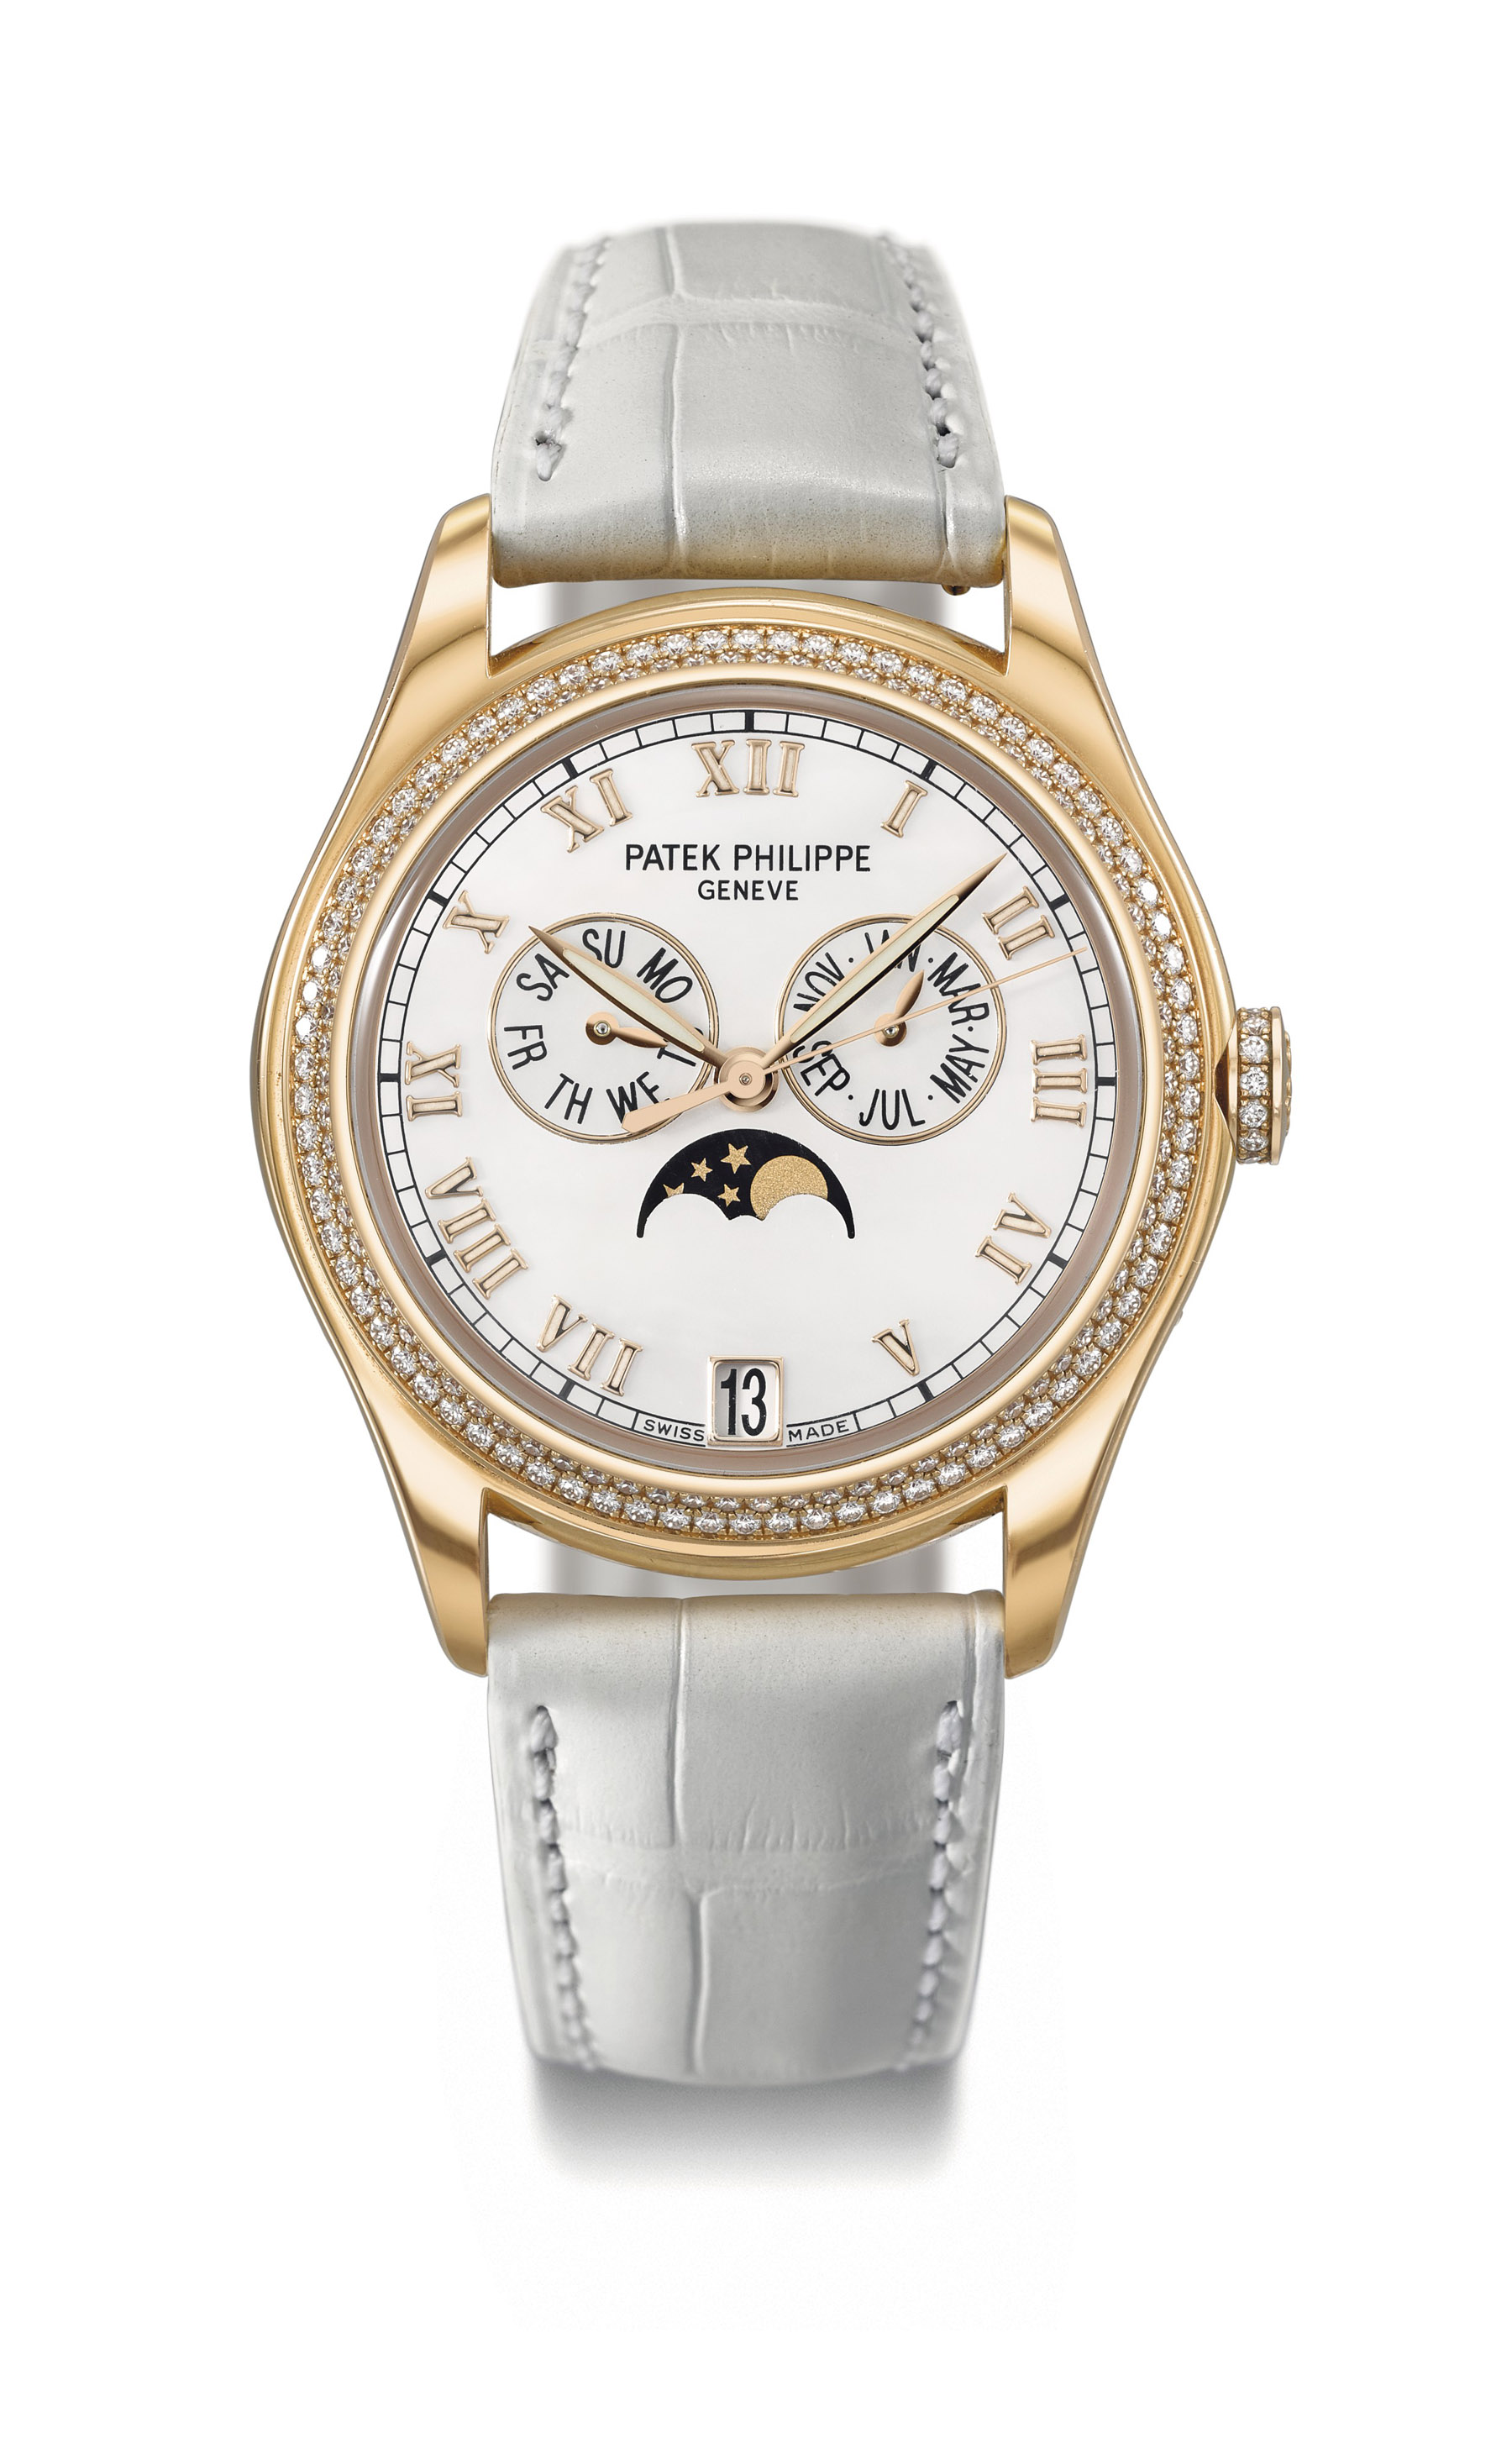 Patek Philippe. A lady's fine and elegant 18K pink gold and diamond-set automatic annual calendar wristwatch with sweep centre seconds, moon phases and mother-of-pearl dial Ref. 4936R-001, circa 2014 Estimate CHF 25,000 – 35,000